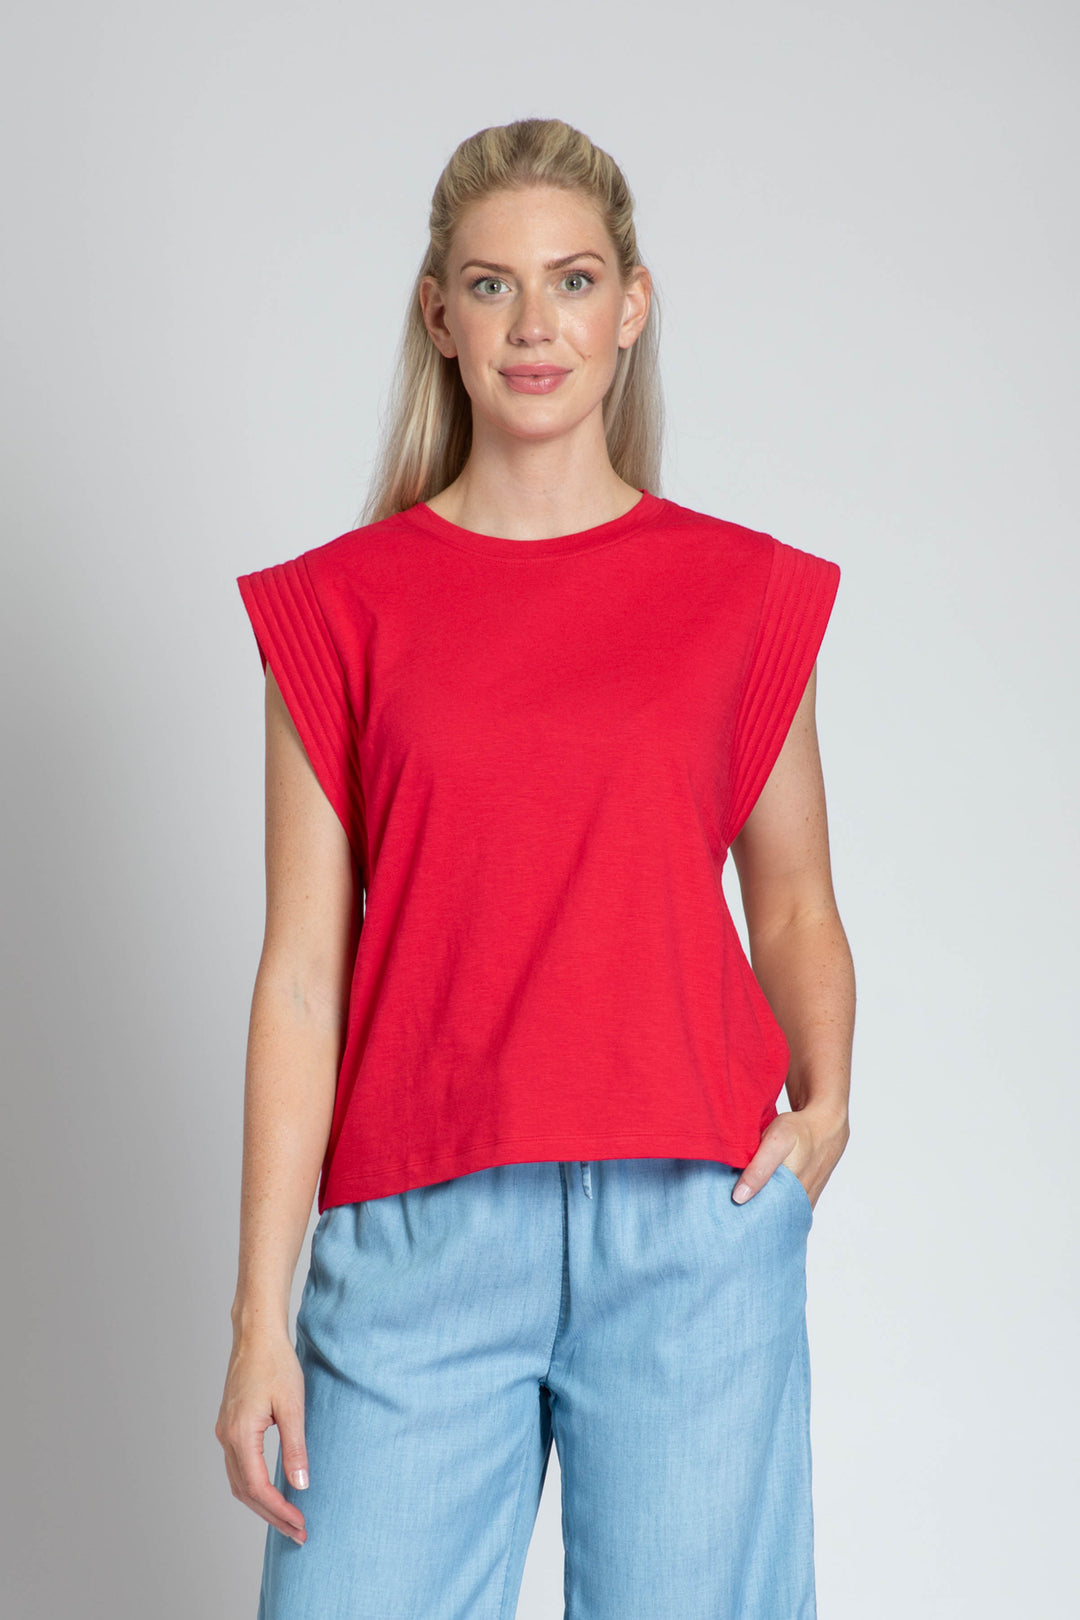 Trapunto Utility Tee in Red